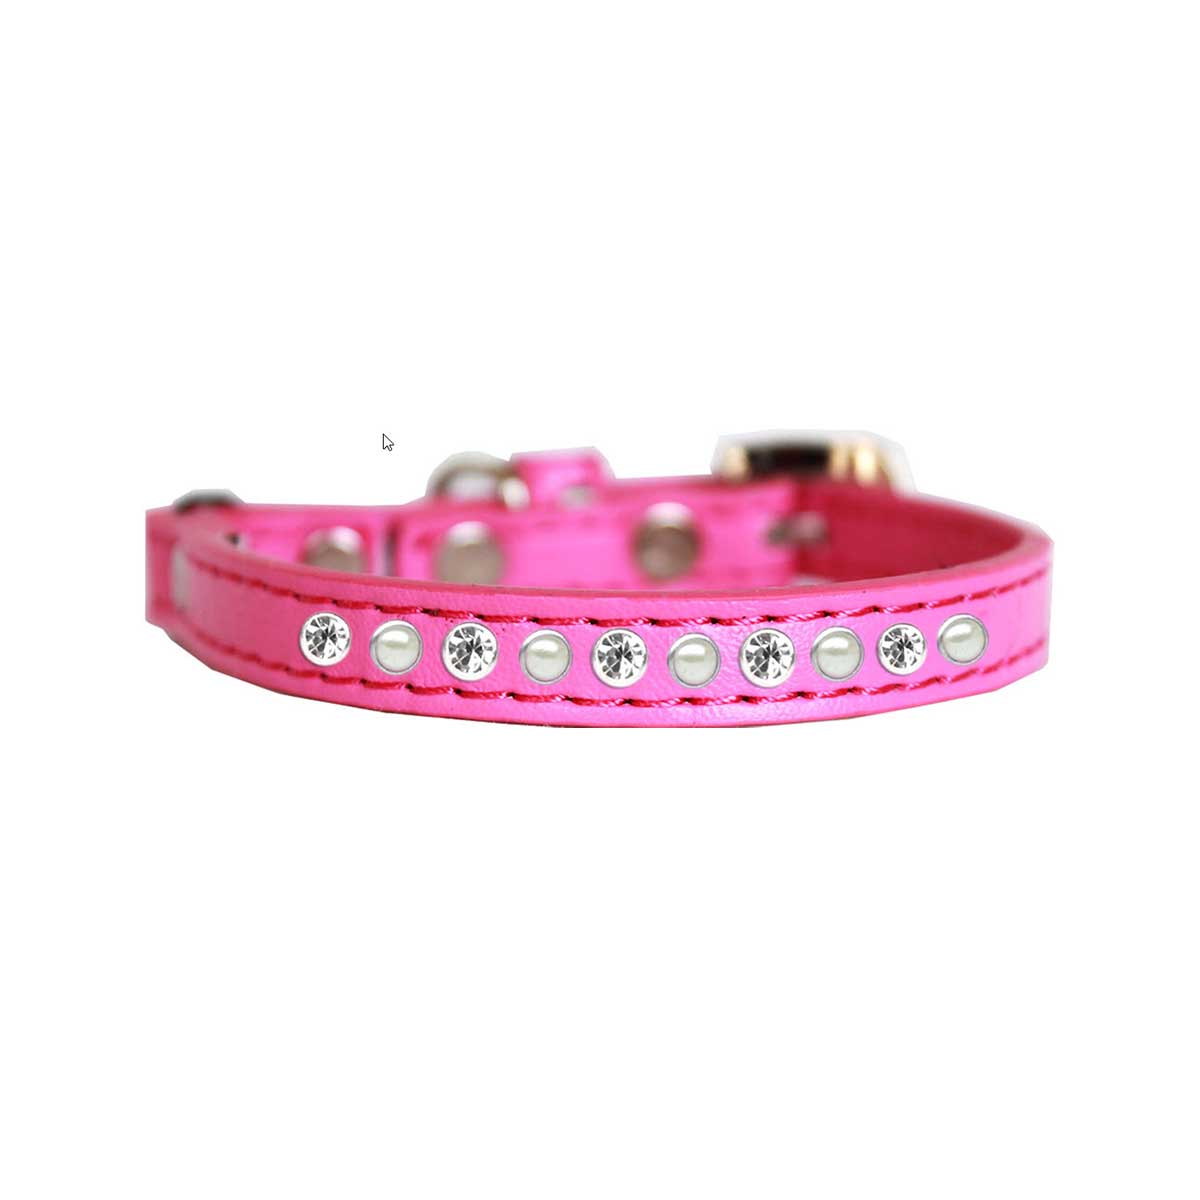 Pearl and Rhinestone Cat Safety Collar in Bright Pink | Pawlicious & Company